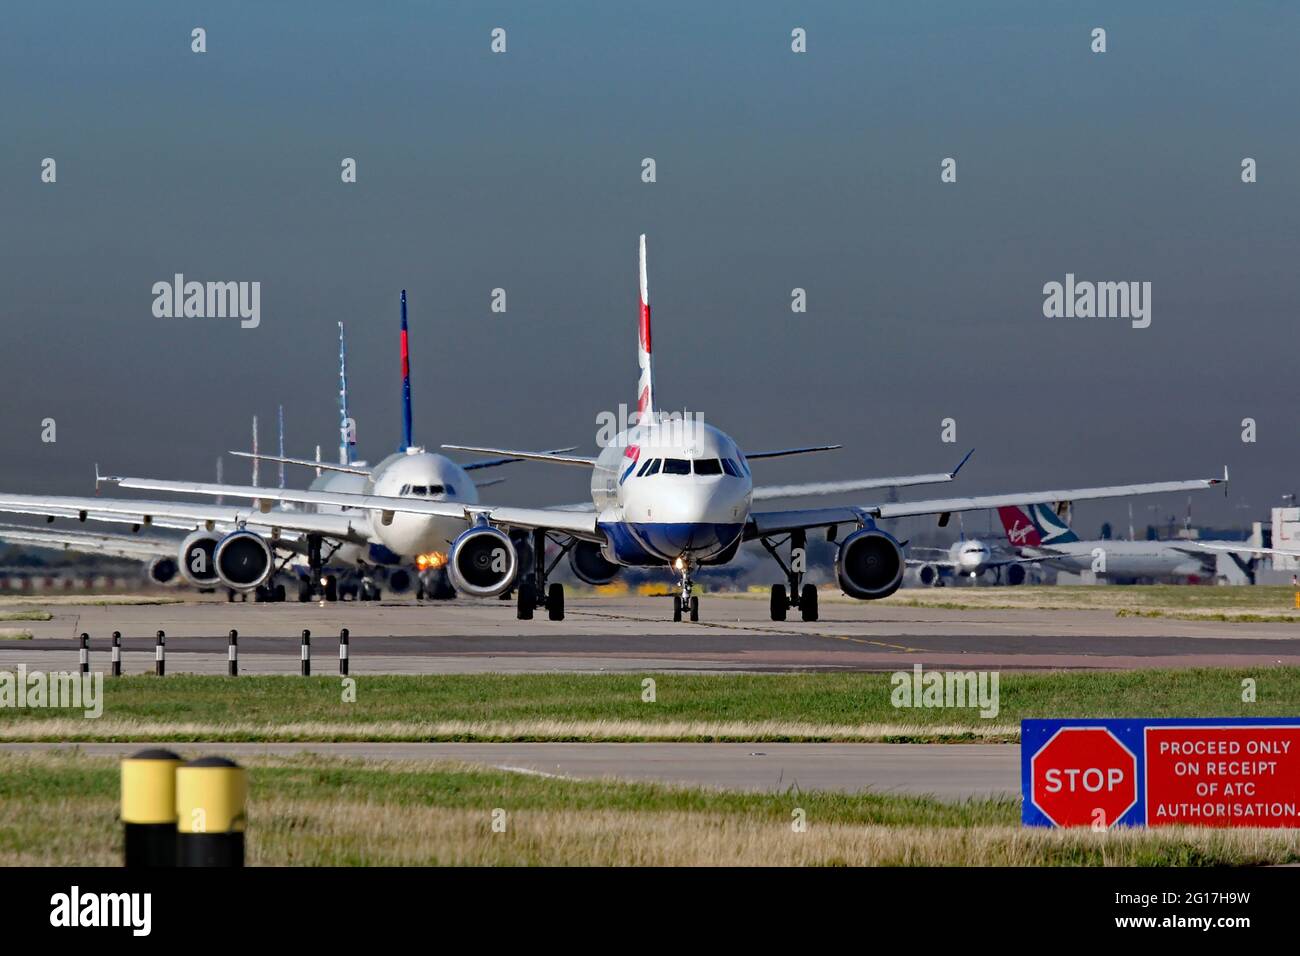 A queue of aircraft waiting for take-off at Heathrow airport Stock Photo